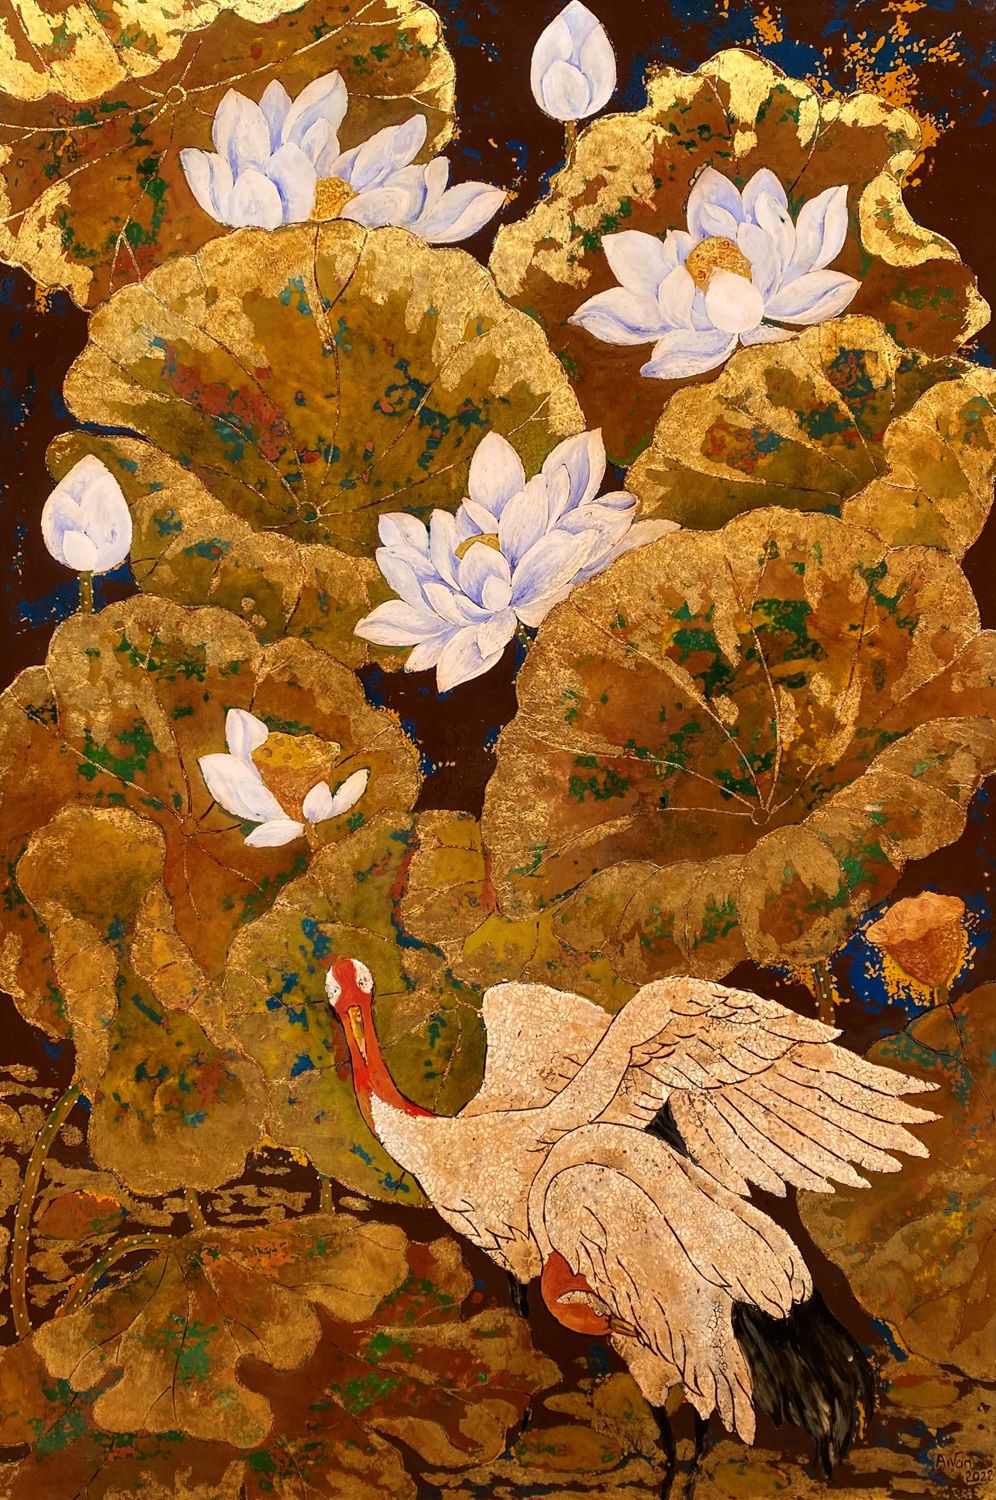 Happiness - Vietnamese Lacquer Painting by Artist Chau Ai Van